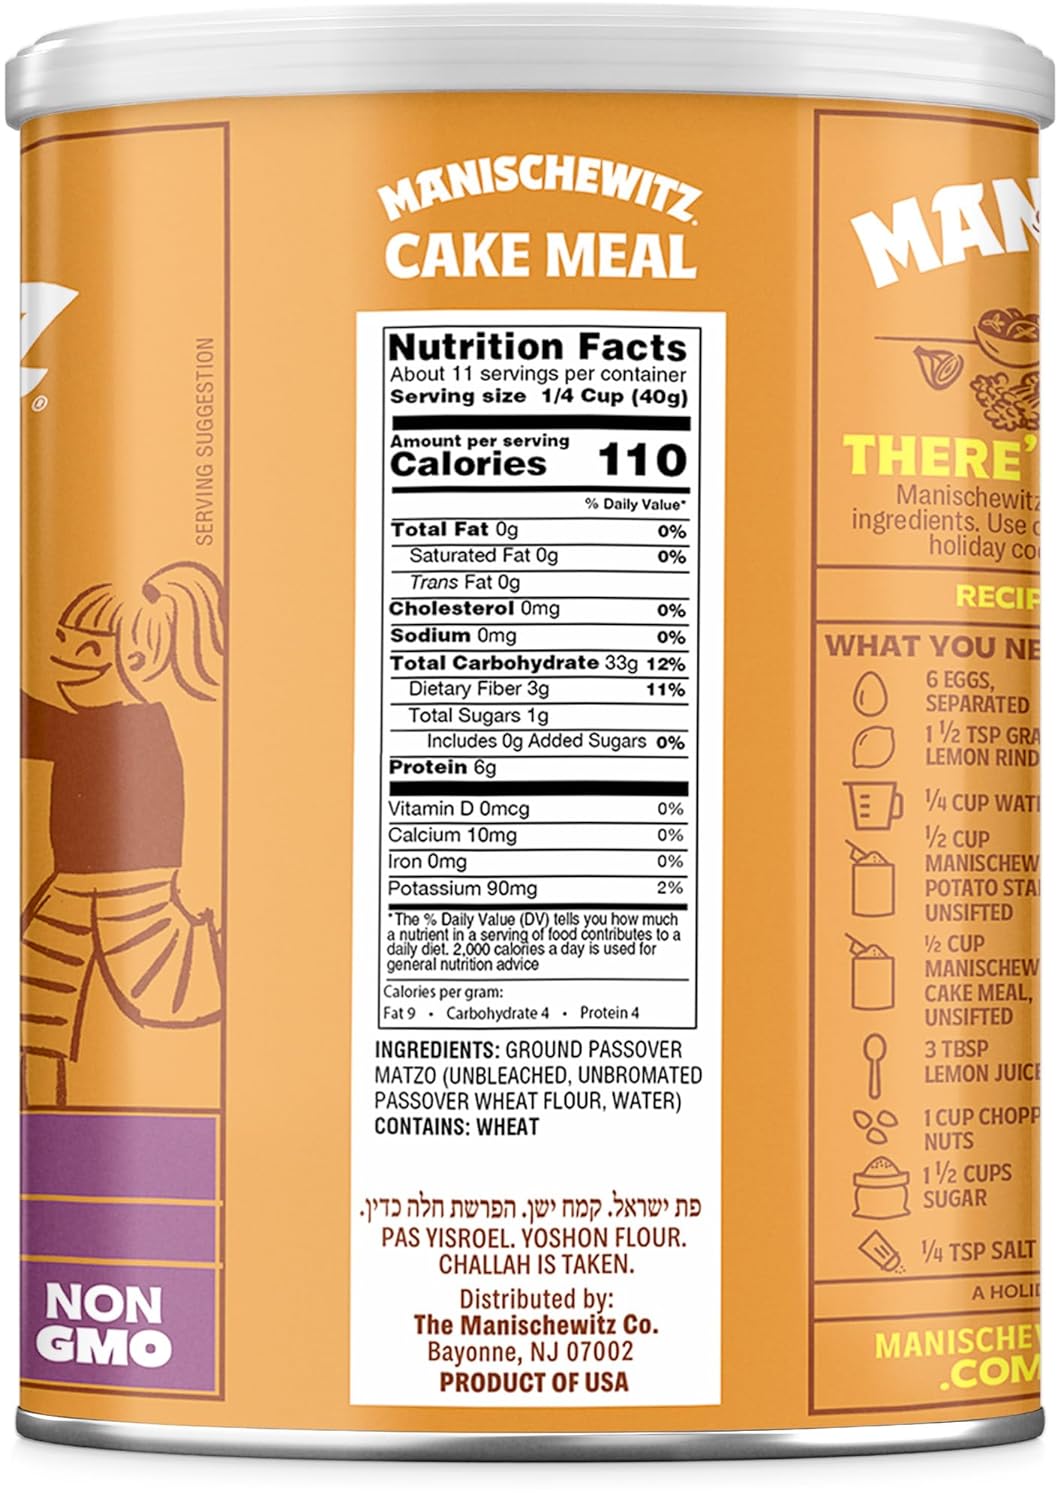 Manischewitz Cake Meal Non GMO Kosher For Passover 16 Oz Can (Pack of 2, Total of 32 Oz) : Grocery & Gourmet Food